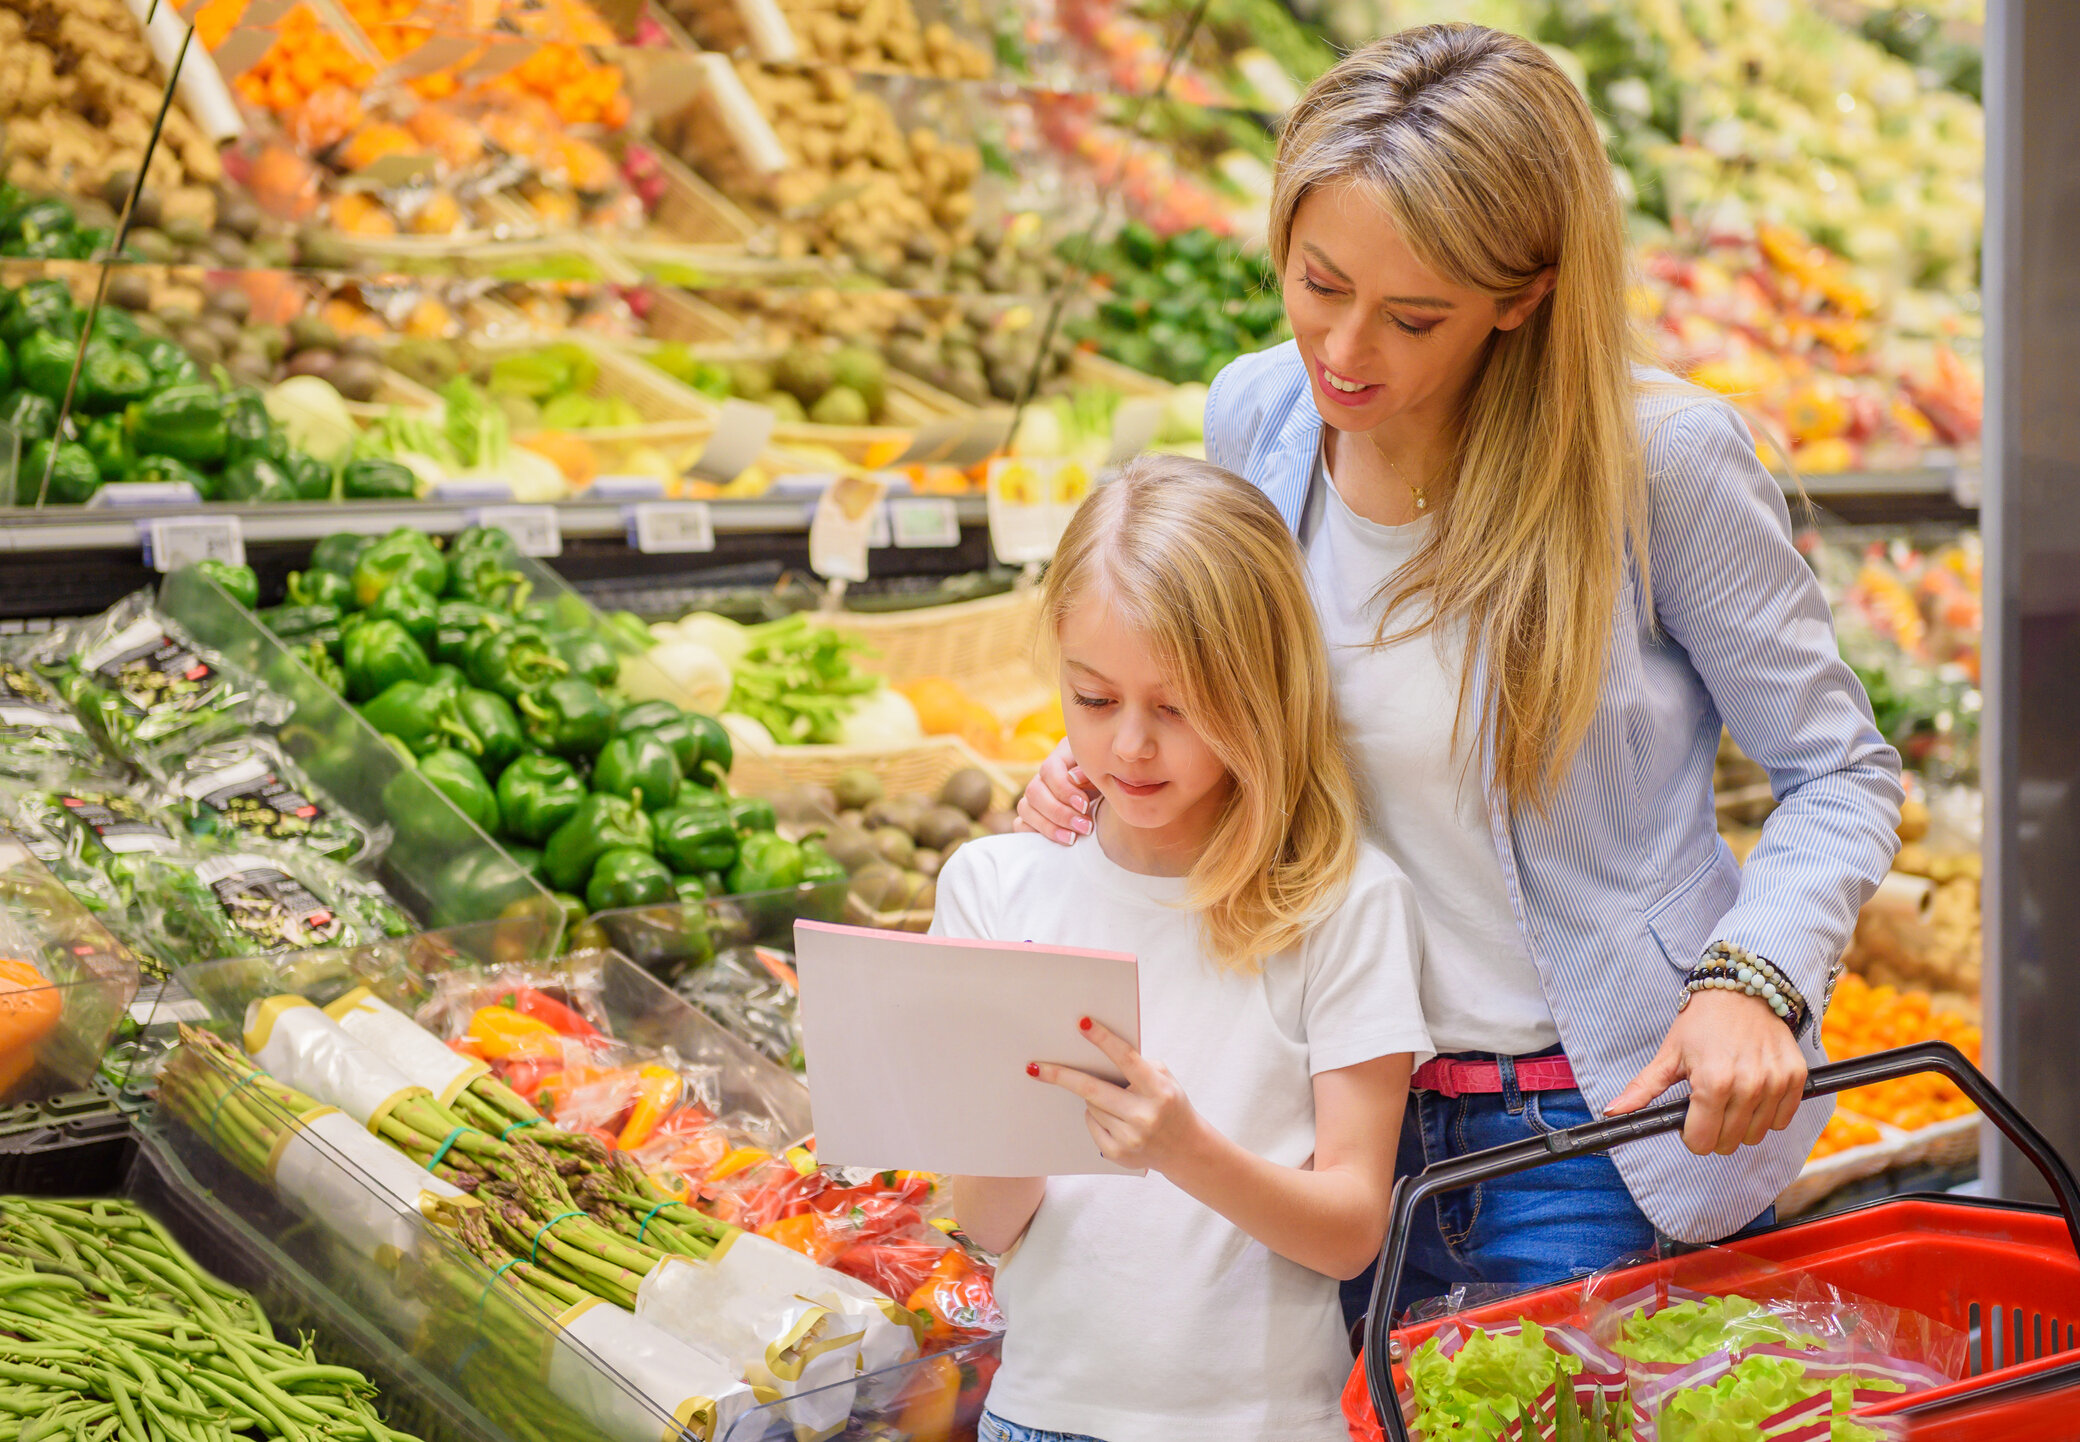 Tips for Battling Increased Food Costs